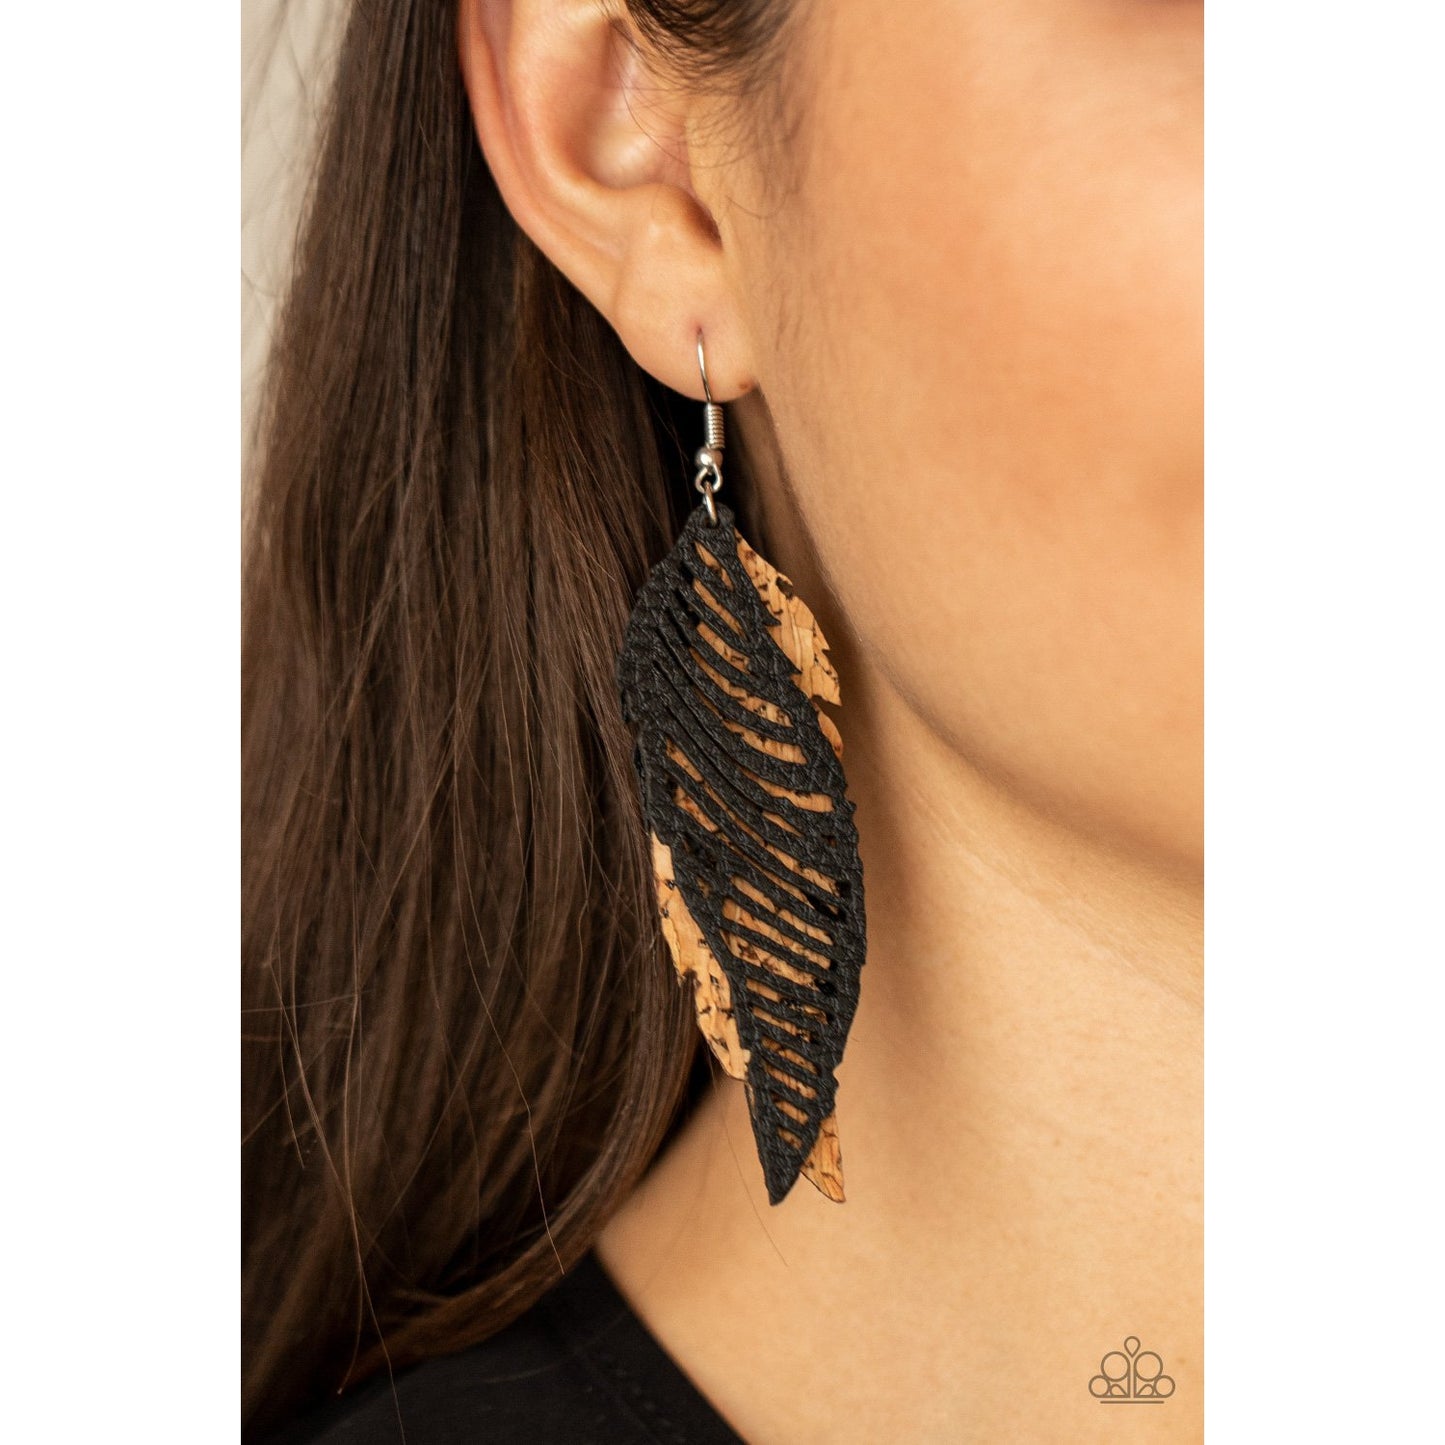 WINGING Off The Hook - Black and Cork Leather Earrings - Paparazzi Accessories - GlaMarous Titi Jewels